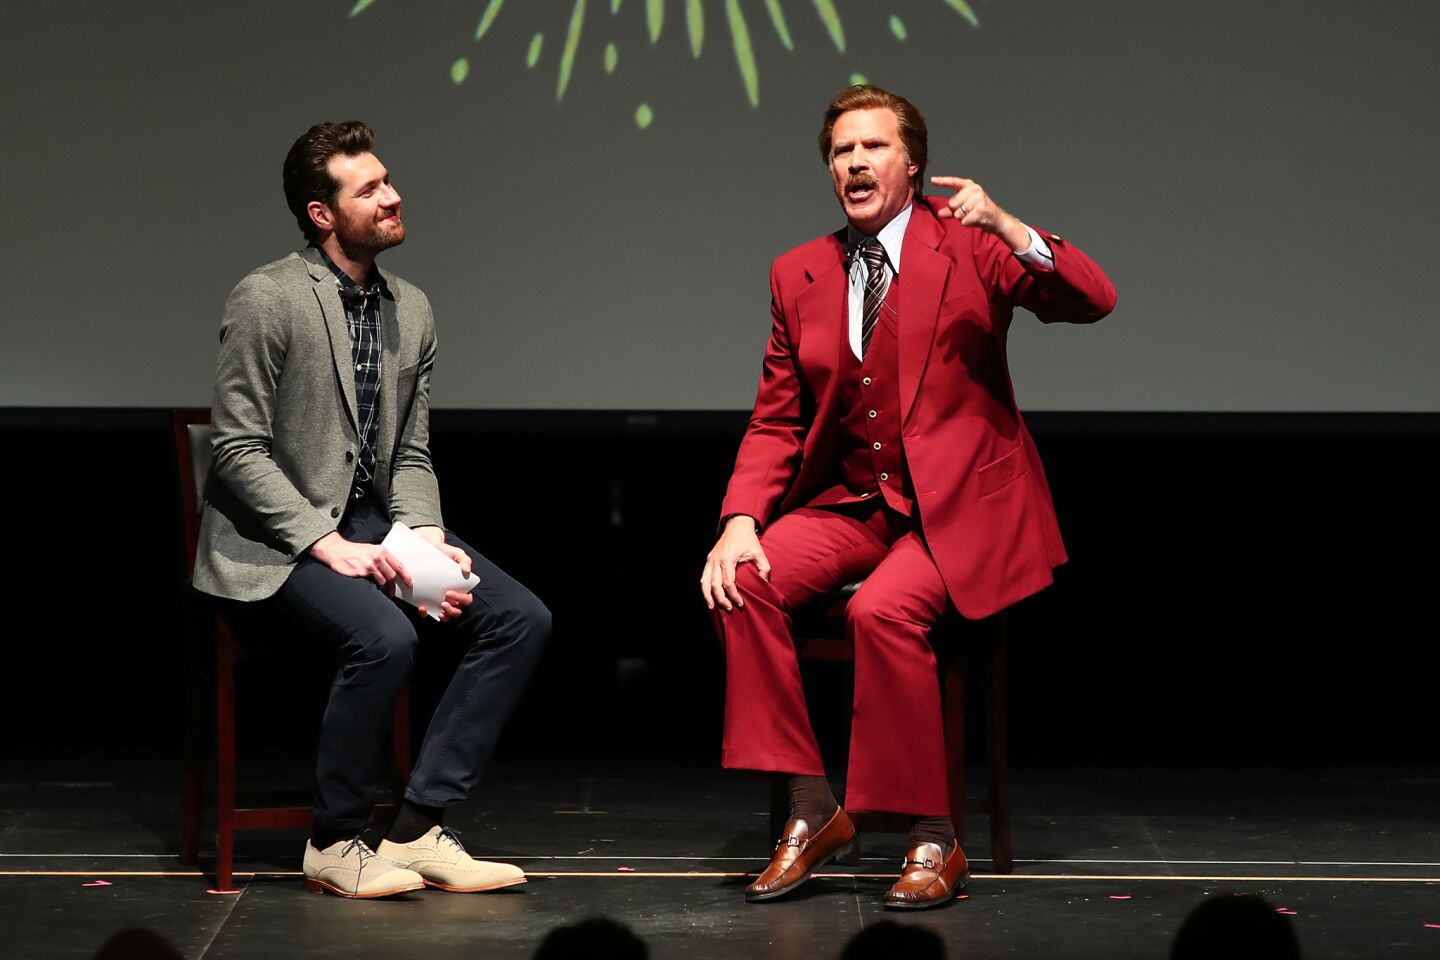 Billy Eichner and Ron Burgundy (Will Ferrell) "Glam Up The Midterms" at Oceanside High School Performing Arts Center, a conversation about the upcoming primary in CA-49 as part of Funny Or Die and Billy Eichner's "Glam Up The Midterms" non-partisan campaign to encourage young people to vote.